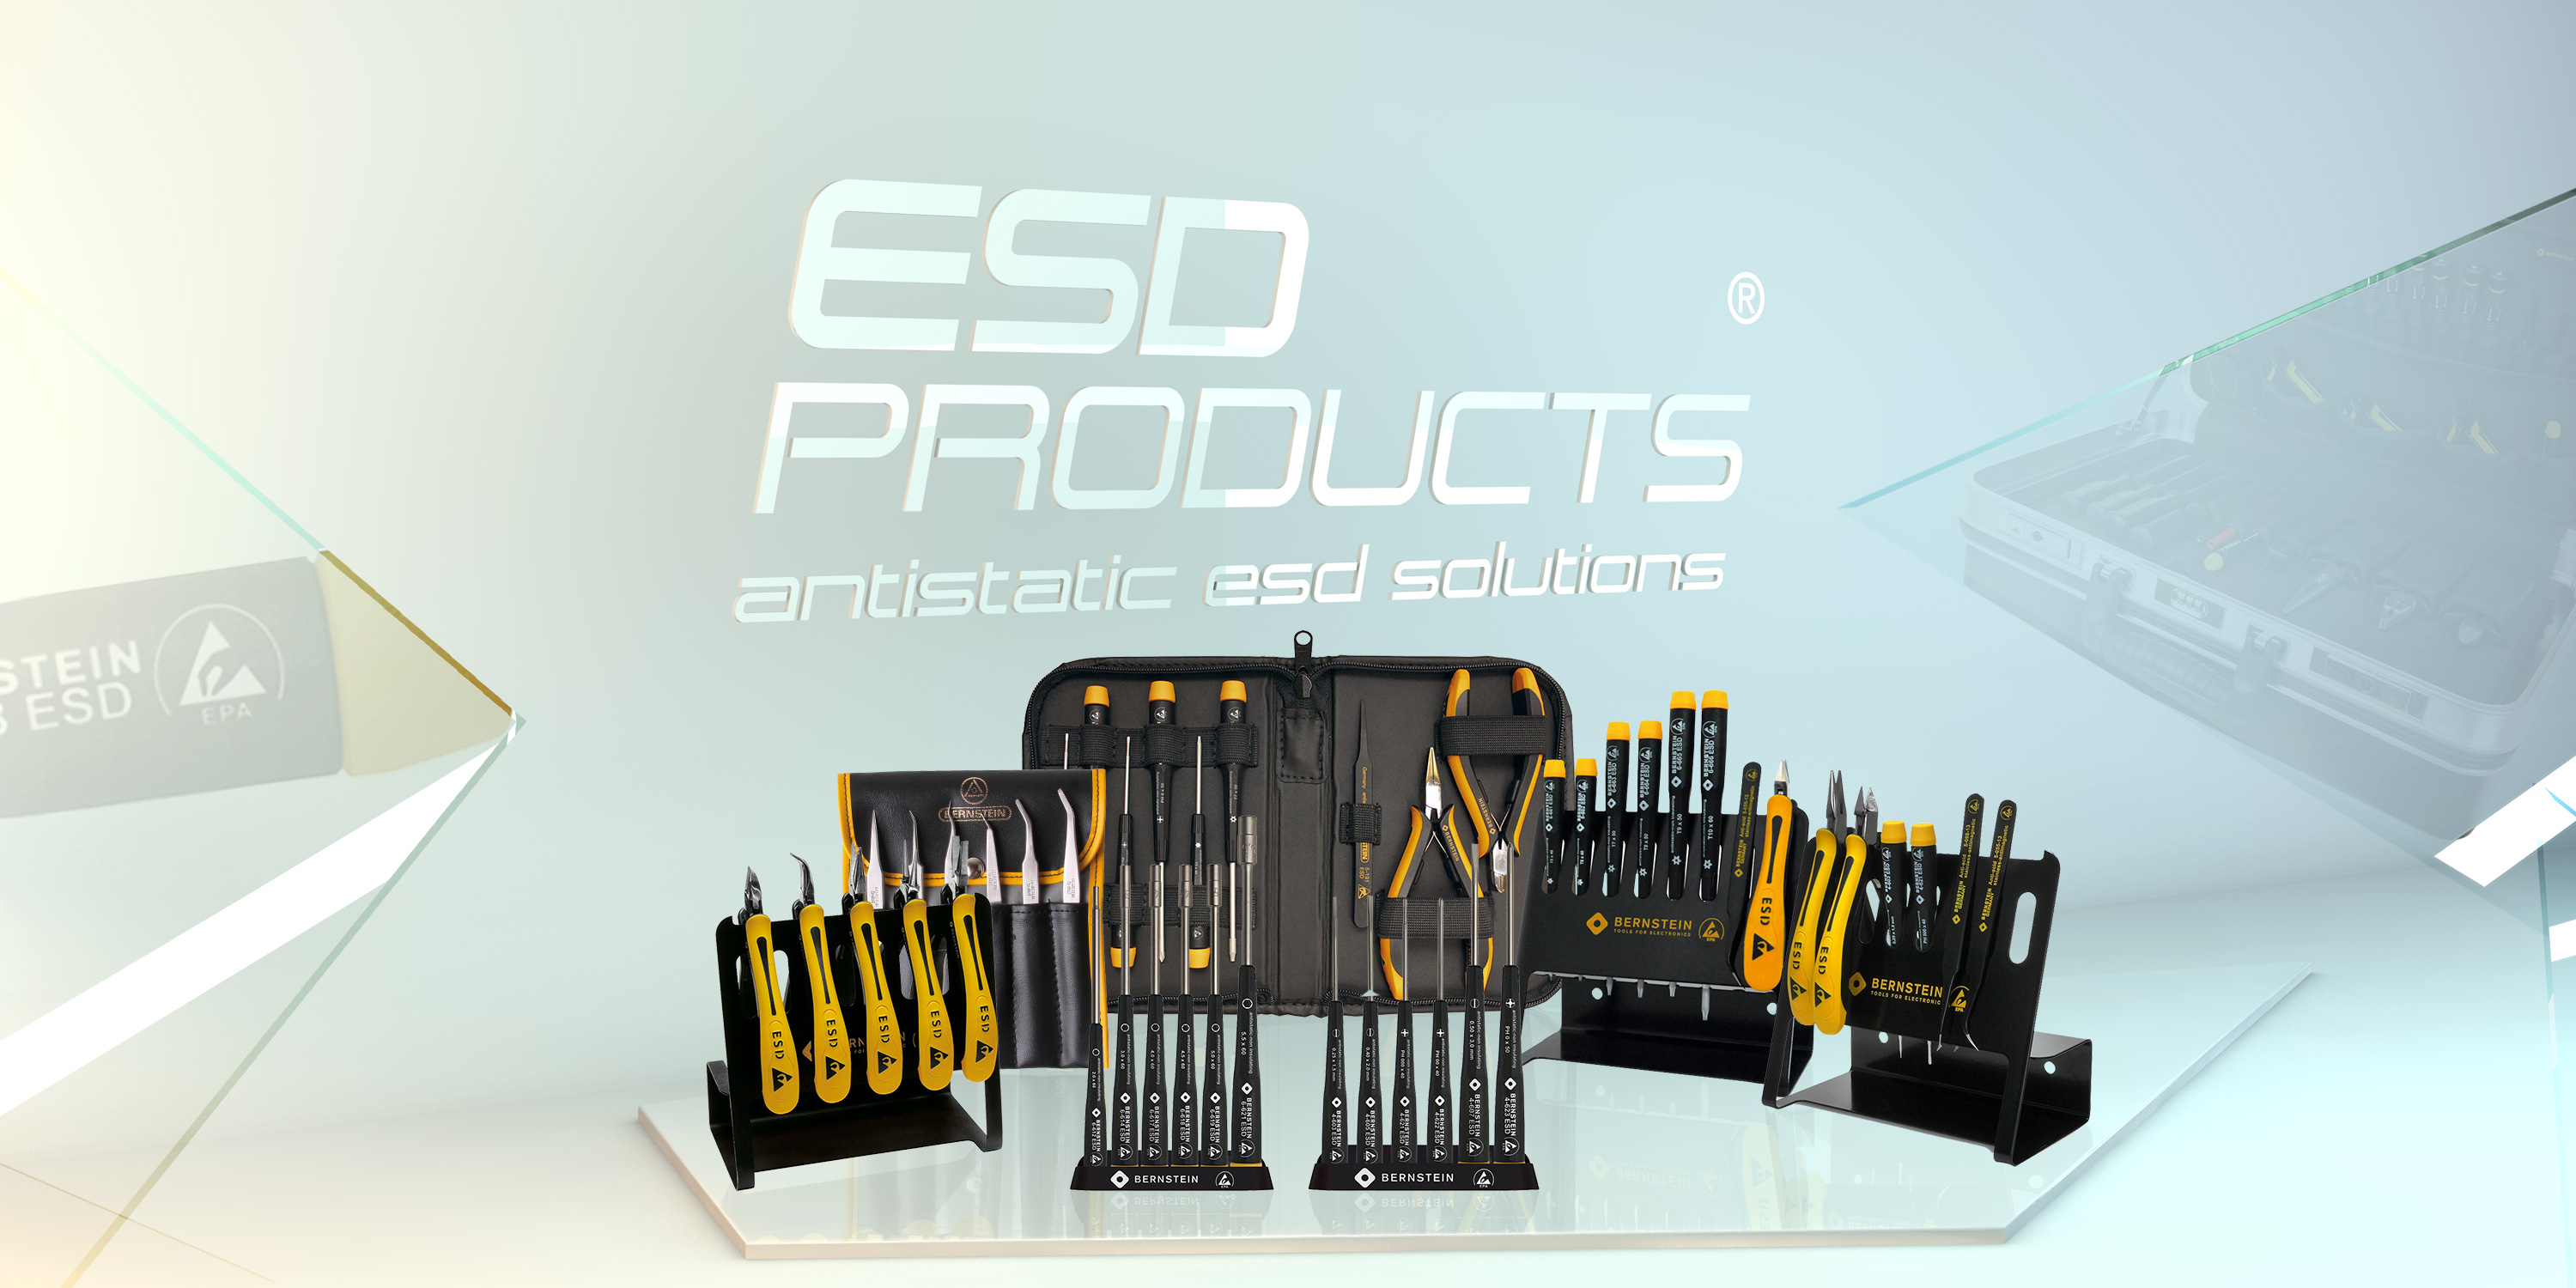 ESD Carrying Toolboxes Anti-Static ESD Protective Storage & Warehousing Systems ESD Hand Tools Equipment Electronic ESD screwdrivers pliers cutters wrenches